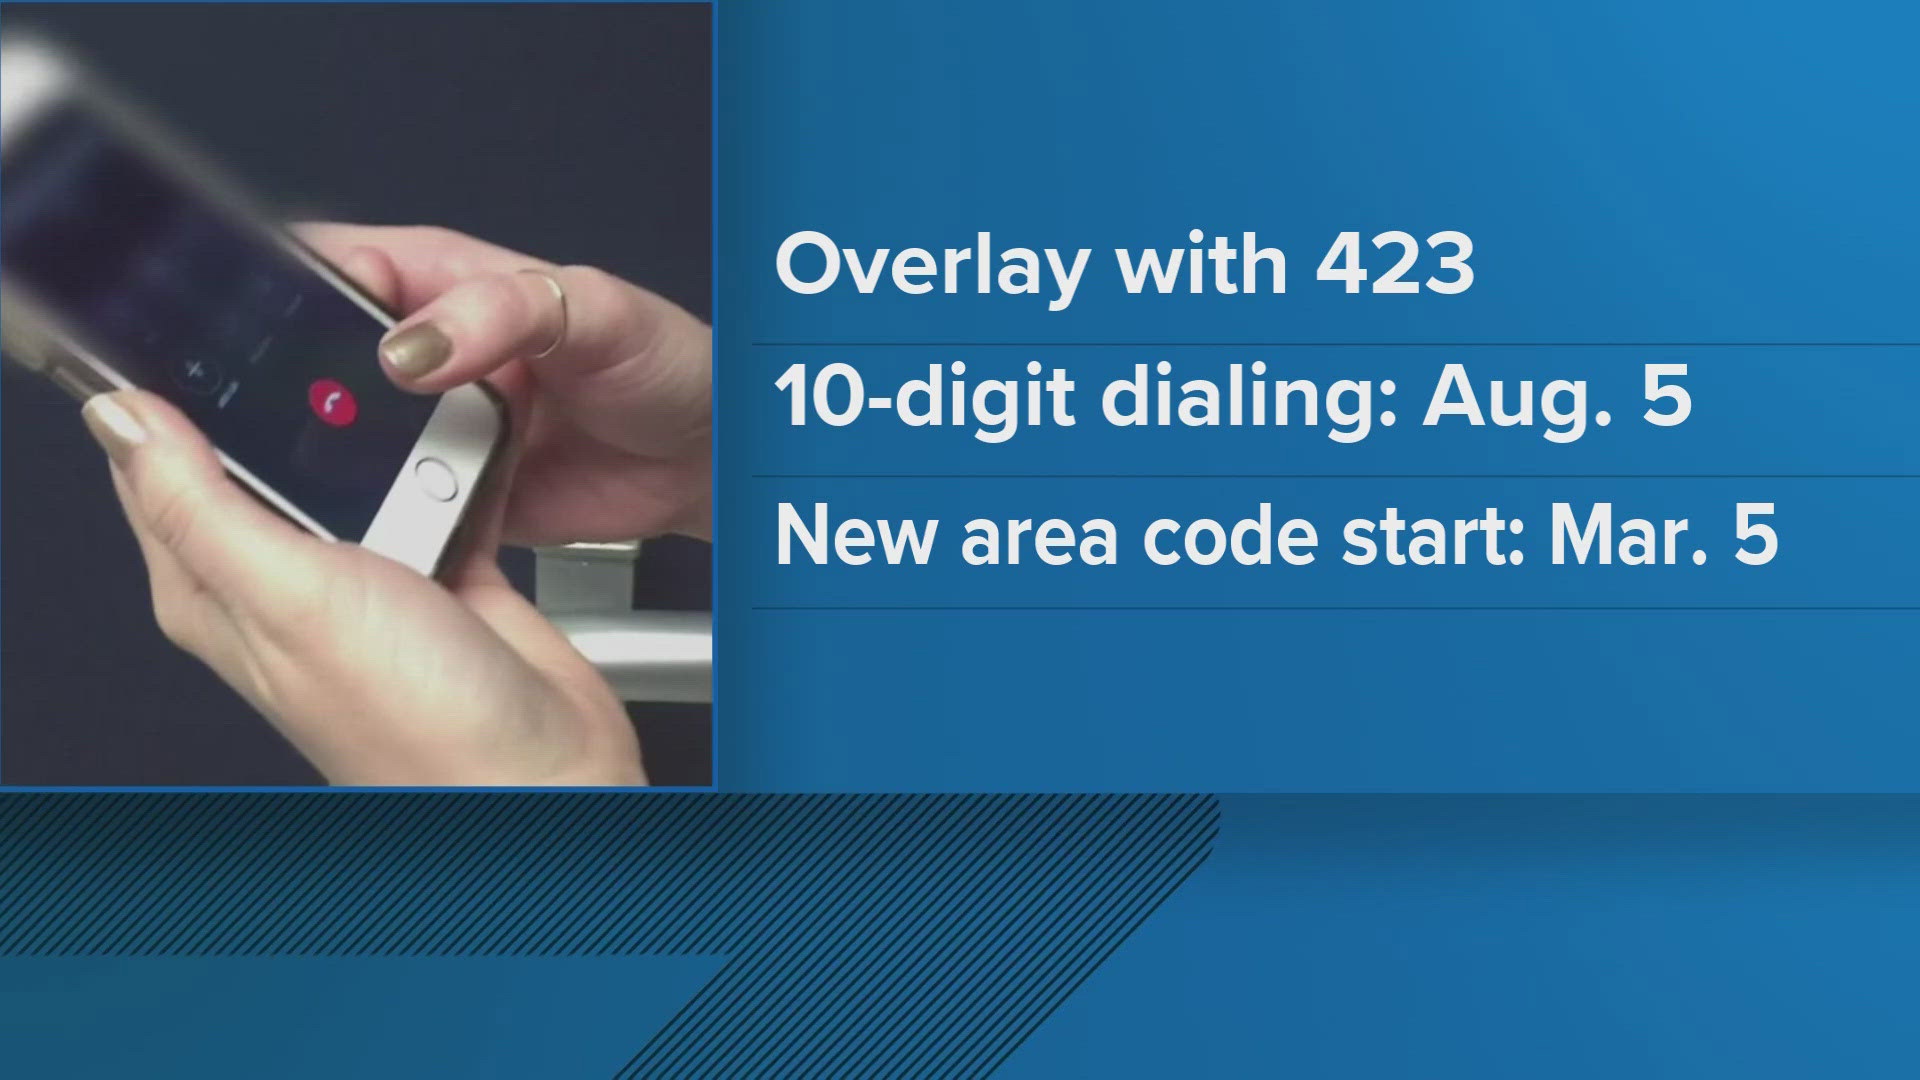 The new area code, 729, will be an overlay for 423. Officials with the state public utility commission said everyone will have to dial area codes in August.